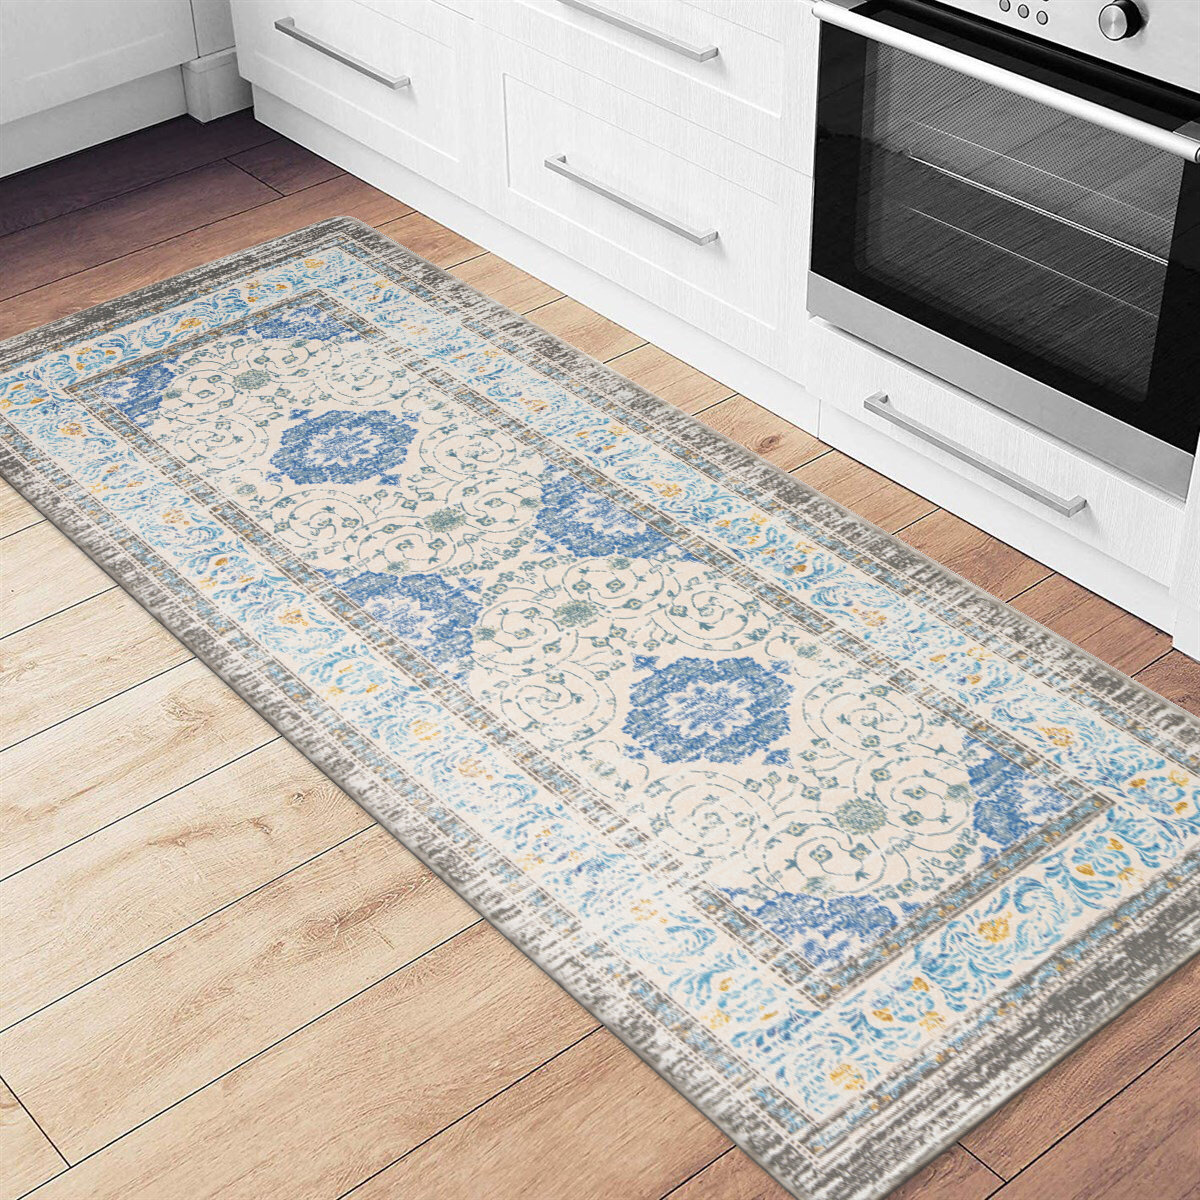 Comfort Area Rug Tribal Ethnic Paisley Pattern Non-Slip Kitchen Rug Floor Mat,Anti Fatigue Standing Mat for Dinning Room Laundry Room Office Hallway 39 x 20